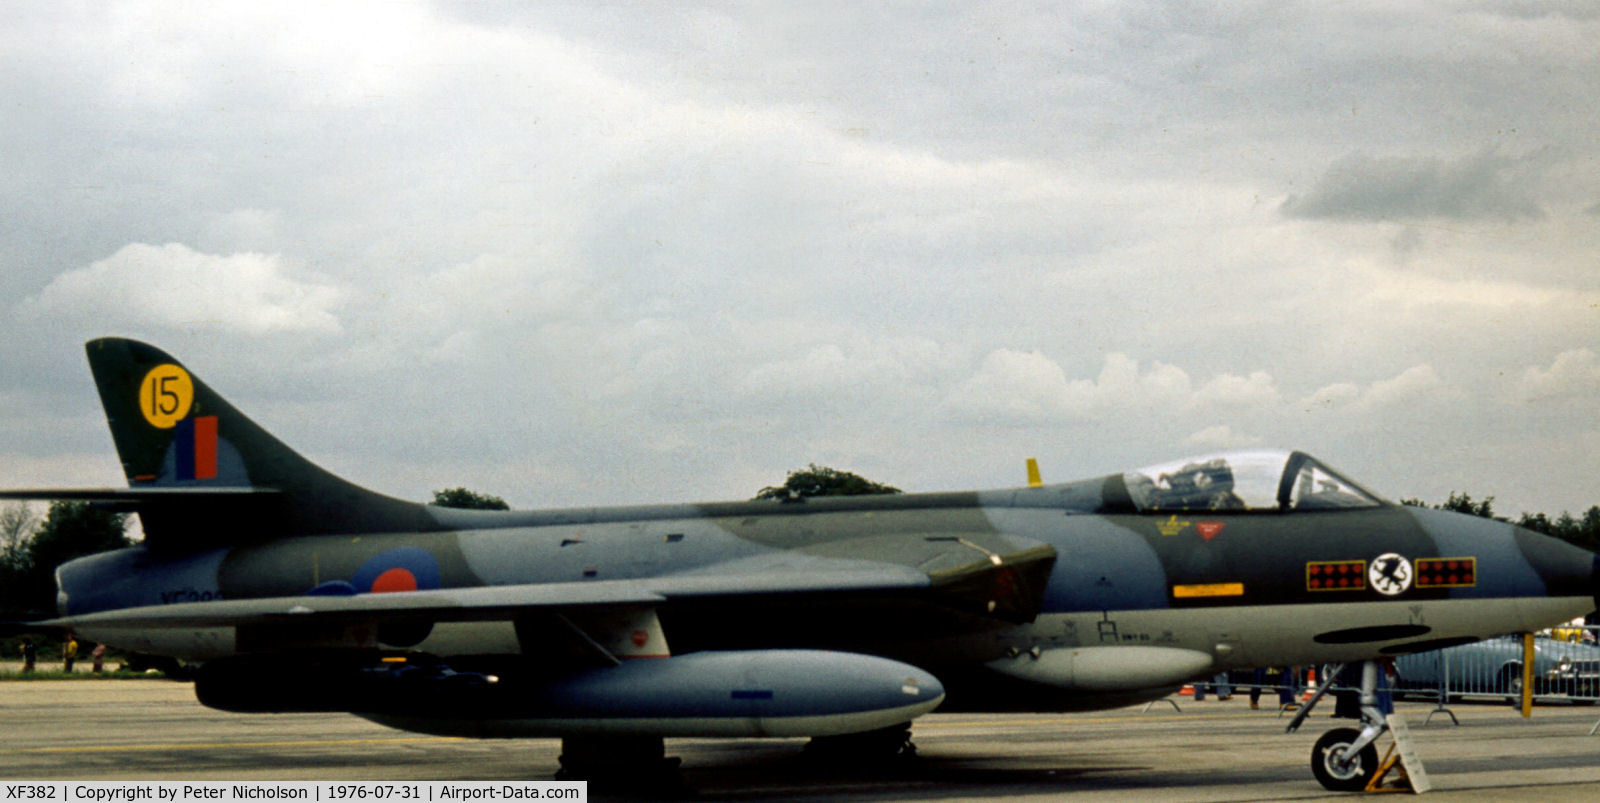 XF382, 1956 Hawker Hunter F.6A C/N S4/U/3282, Another view of this Hunter F.6A of 234 Squadron on display at the 1976 International Air Tattoo held at RAF Greenham Common.